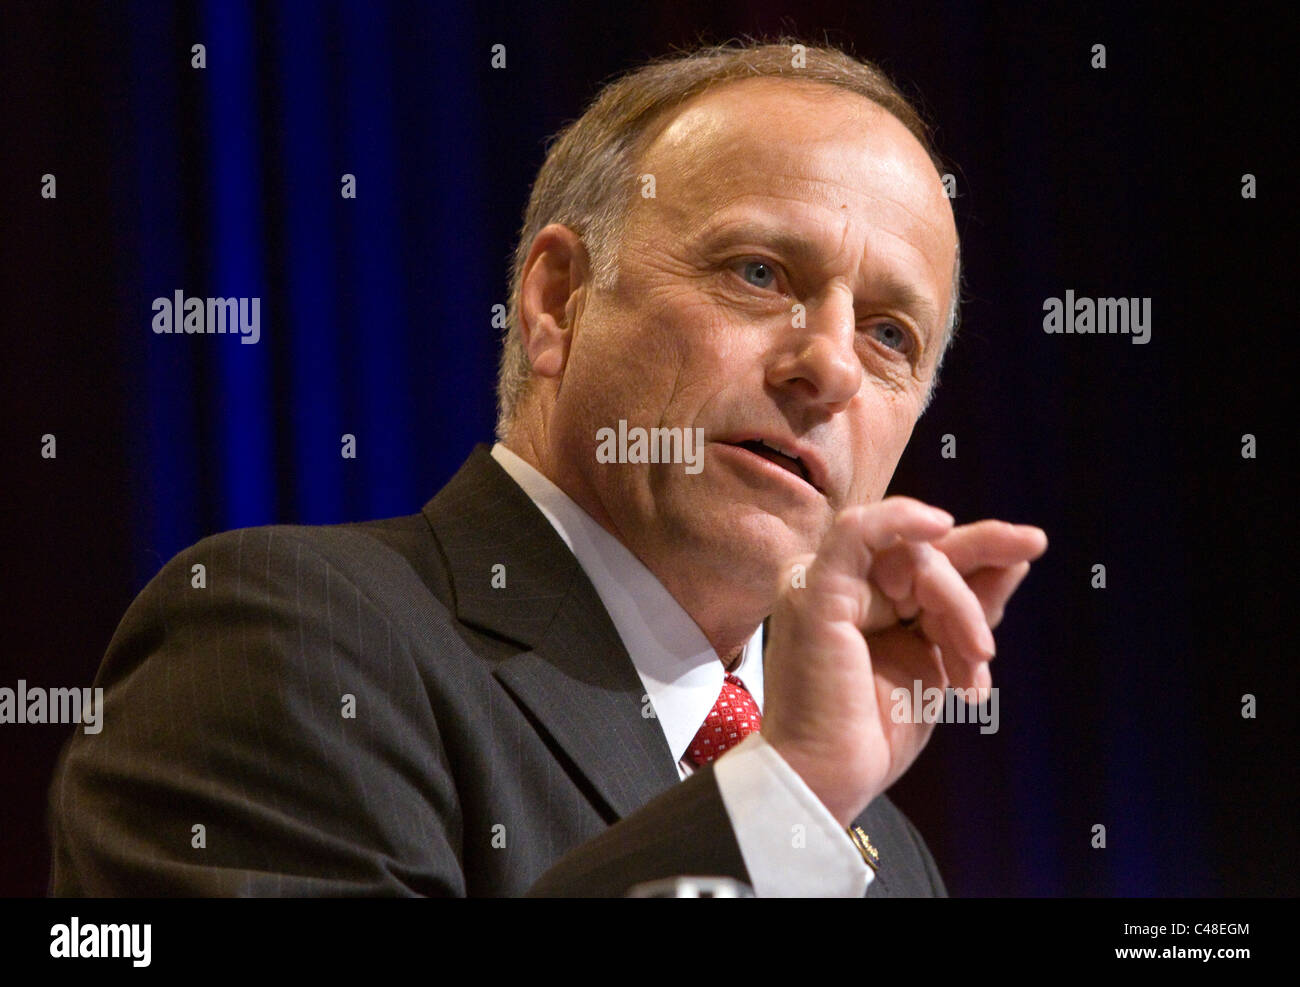 Representative Steve King of Iowa speaks at the CPAC conference in Washington DC. Stock Photo